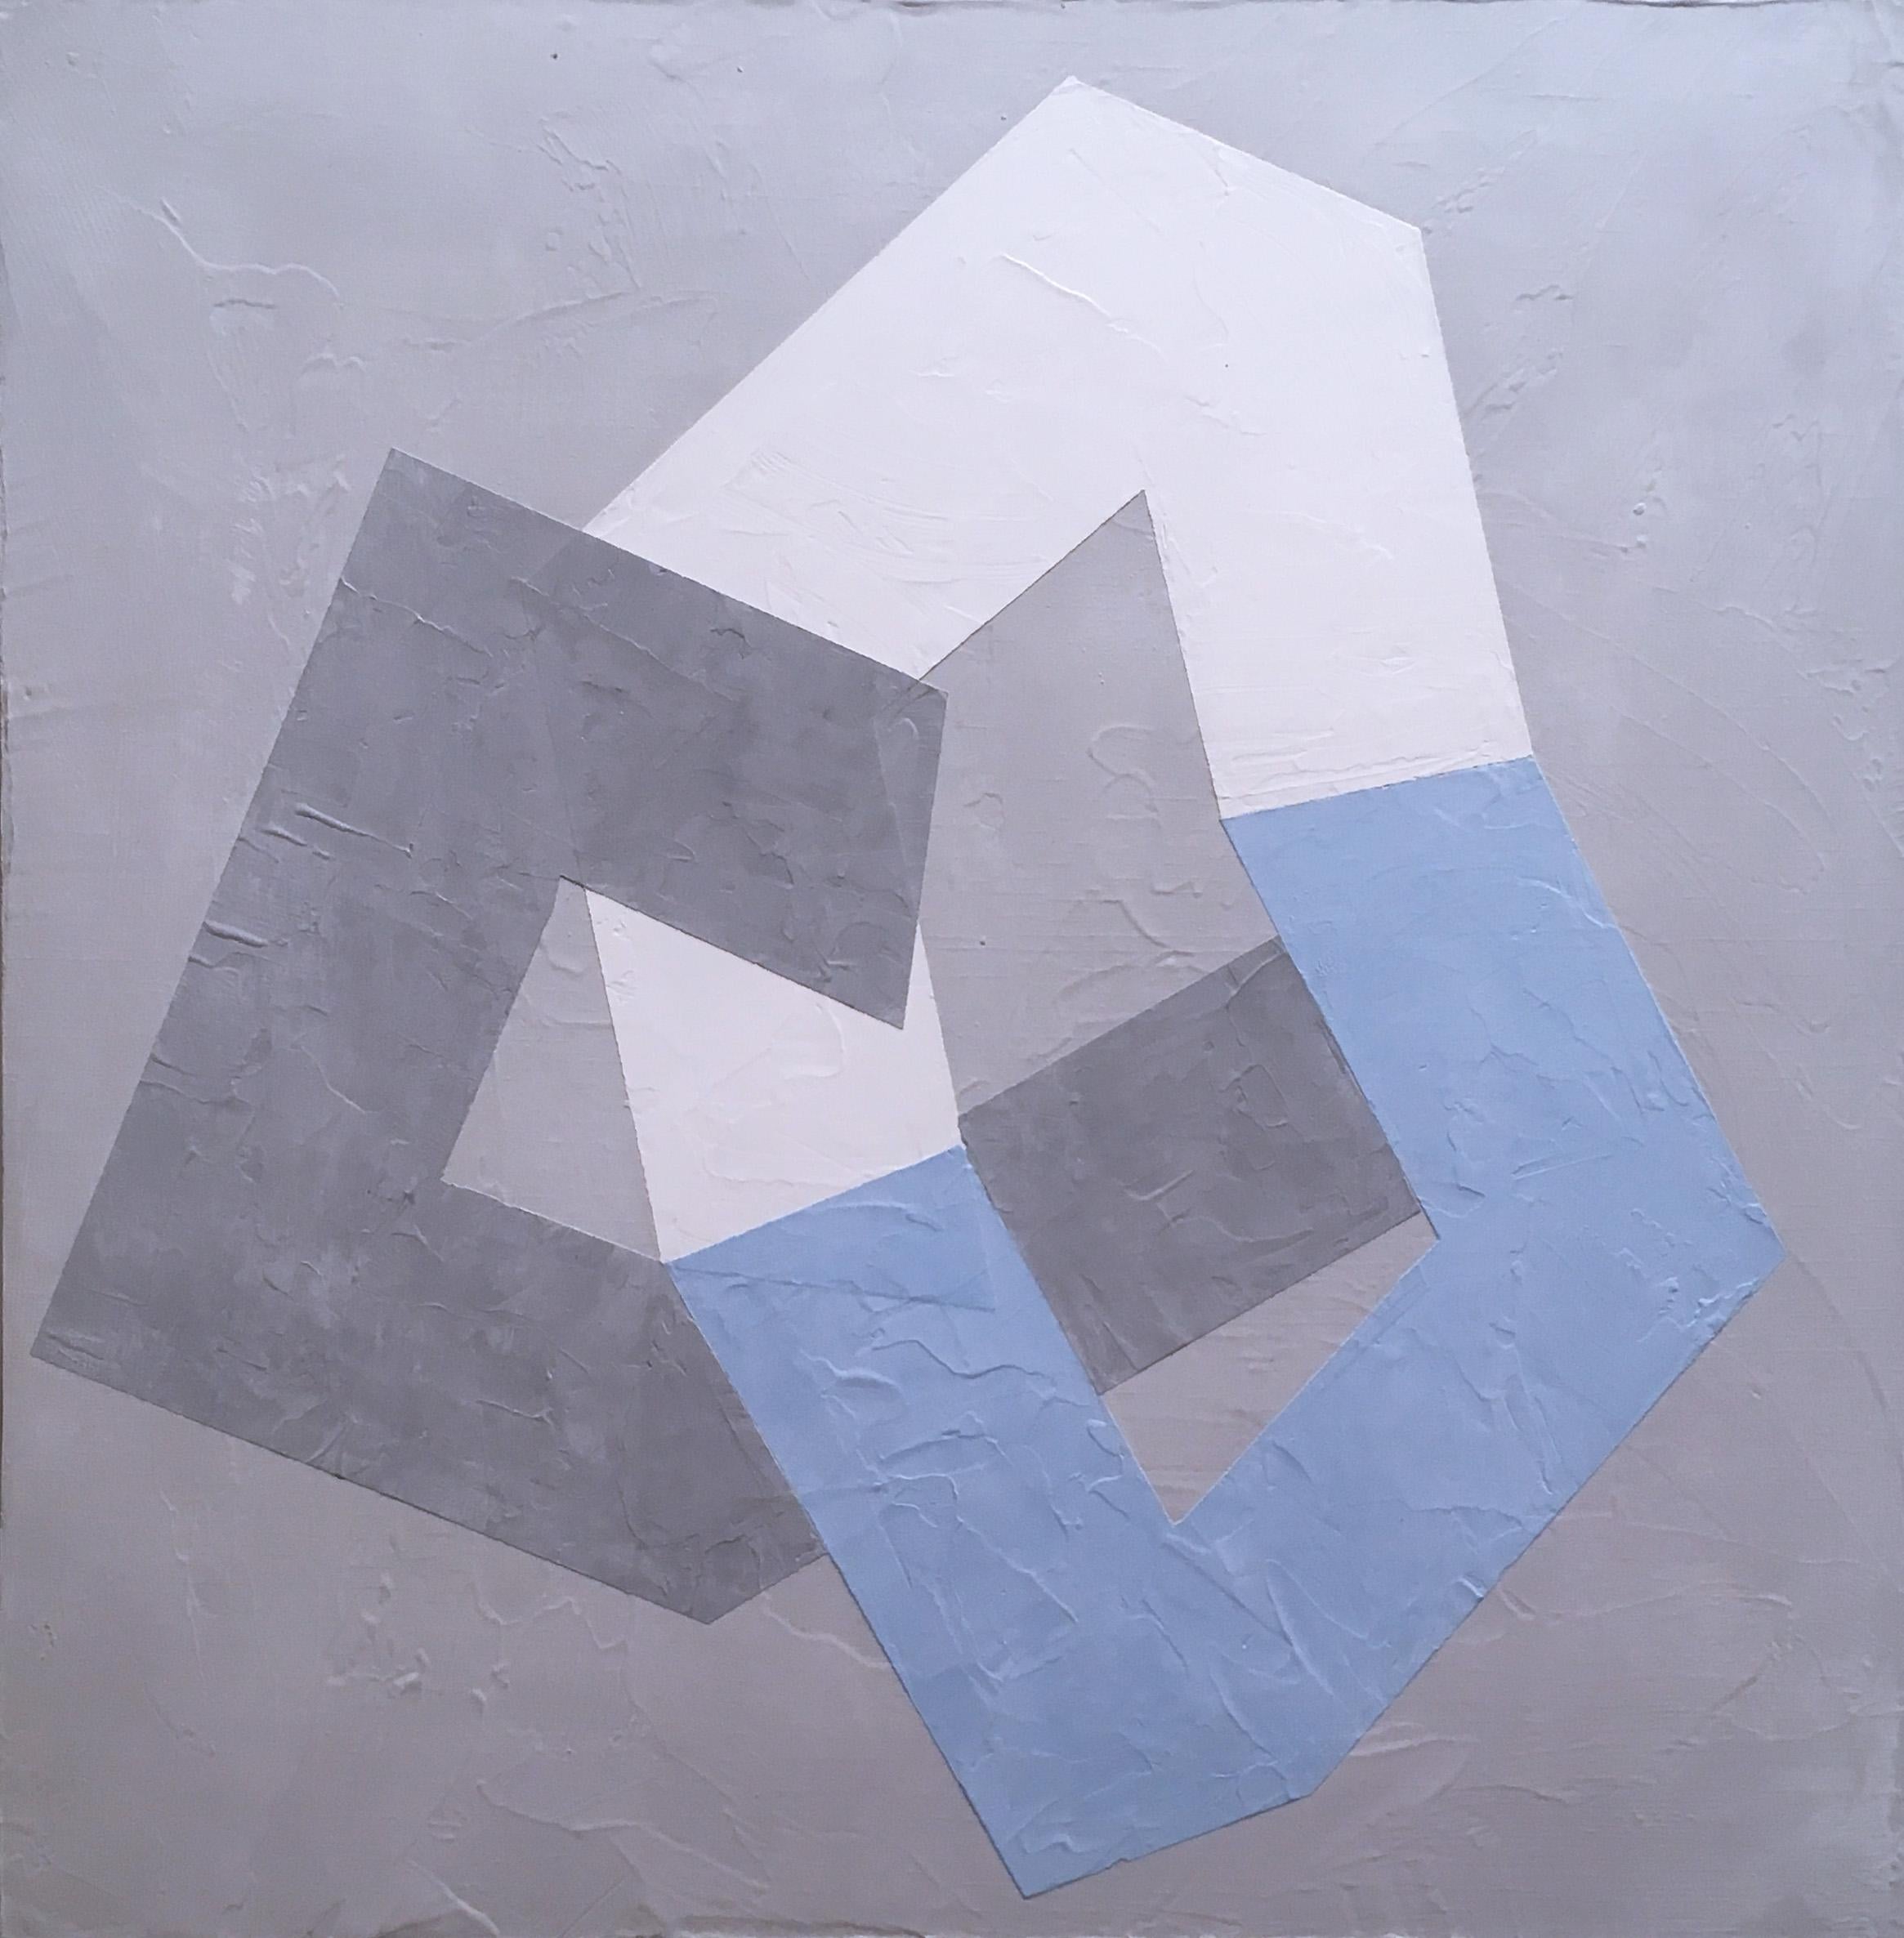 Options VI, 2020, Abstract geometry, non-objective, plaster, gray, blue, white